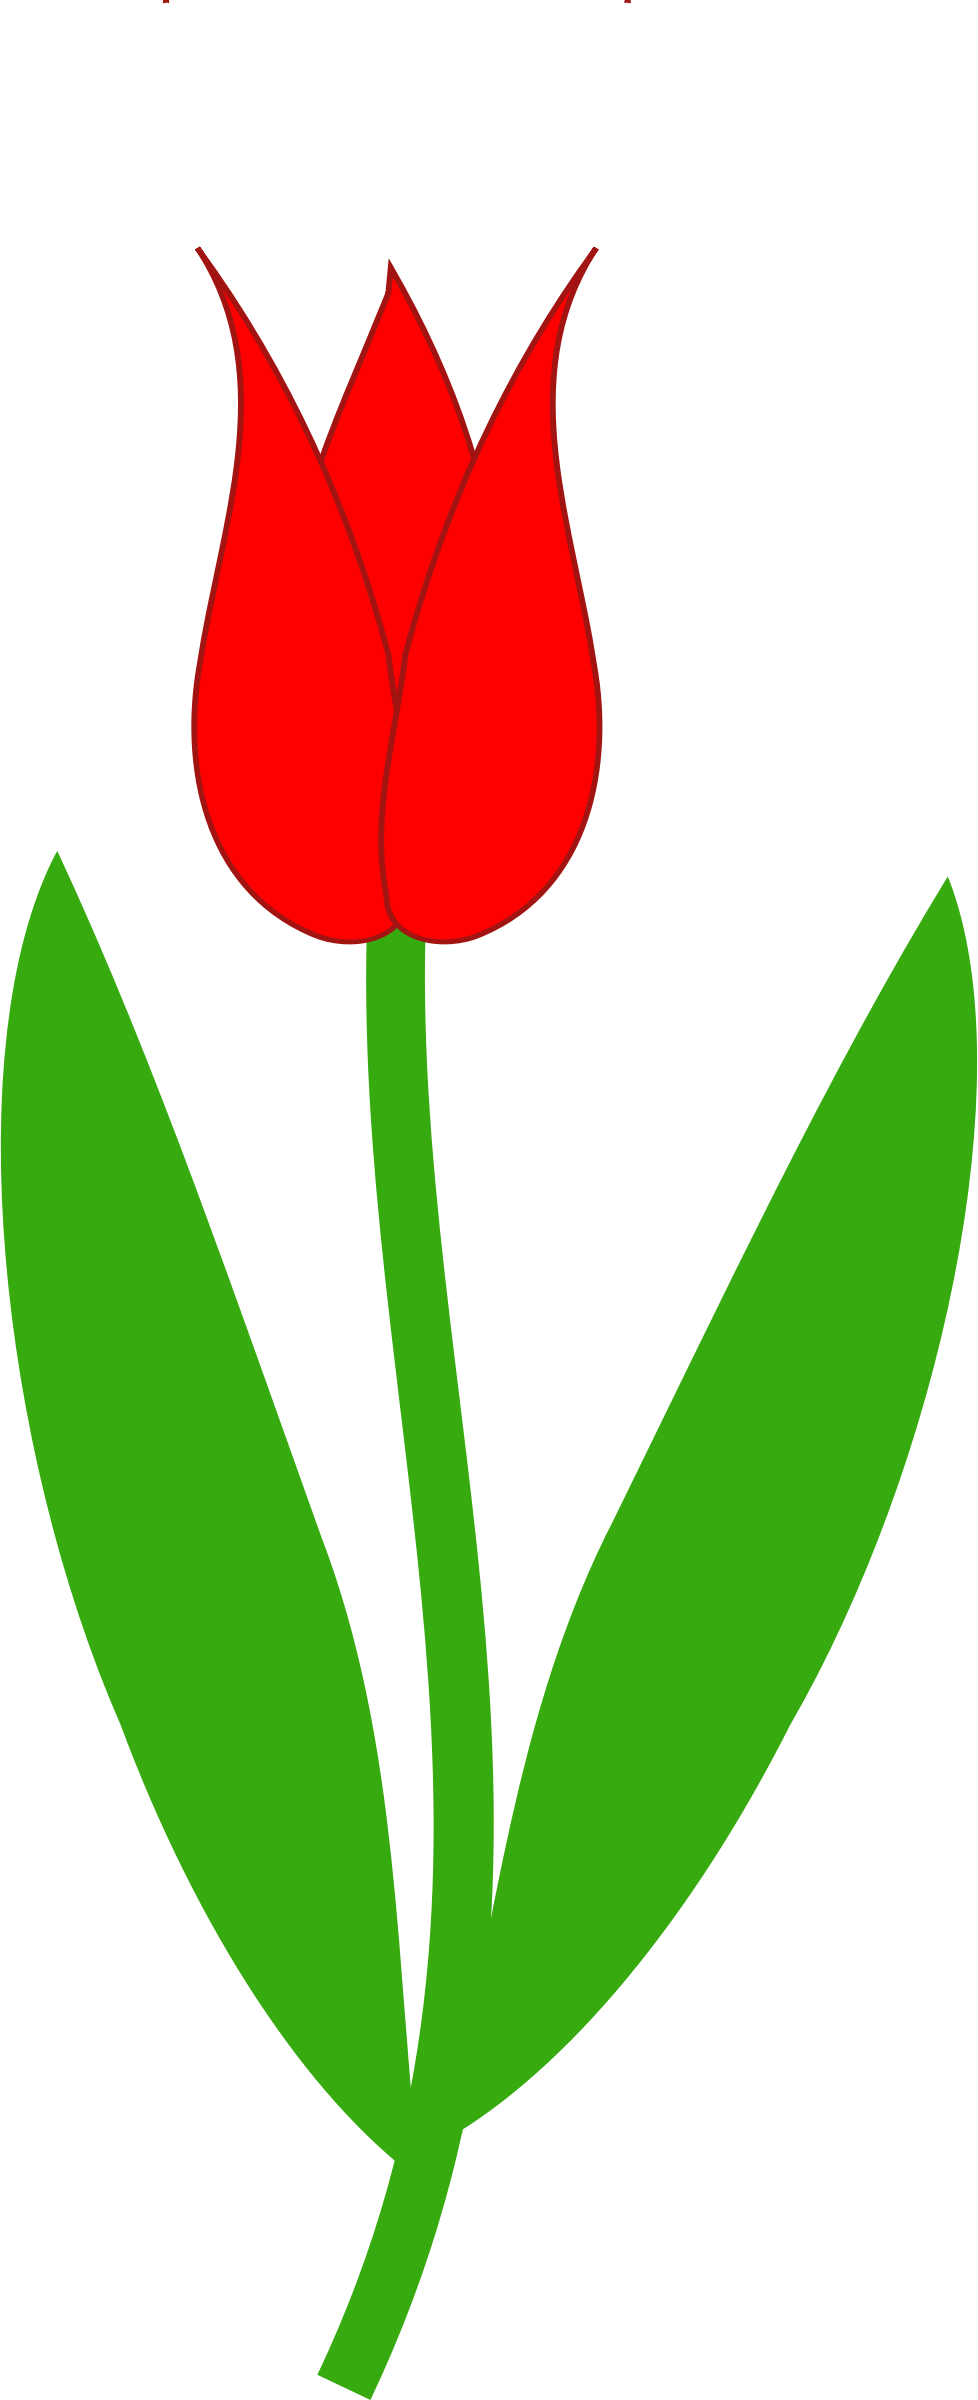 A Red Tulip With Green Leaves